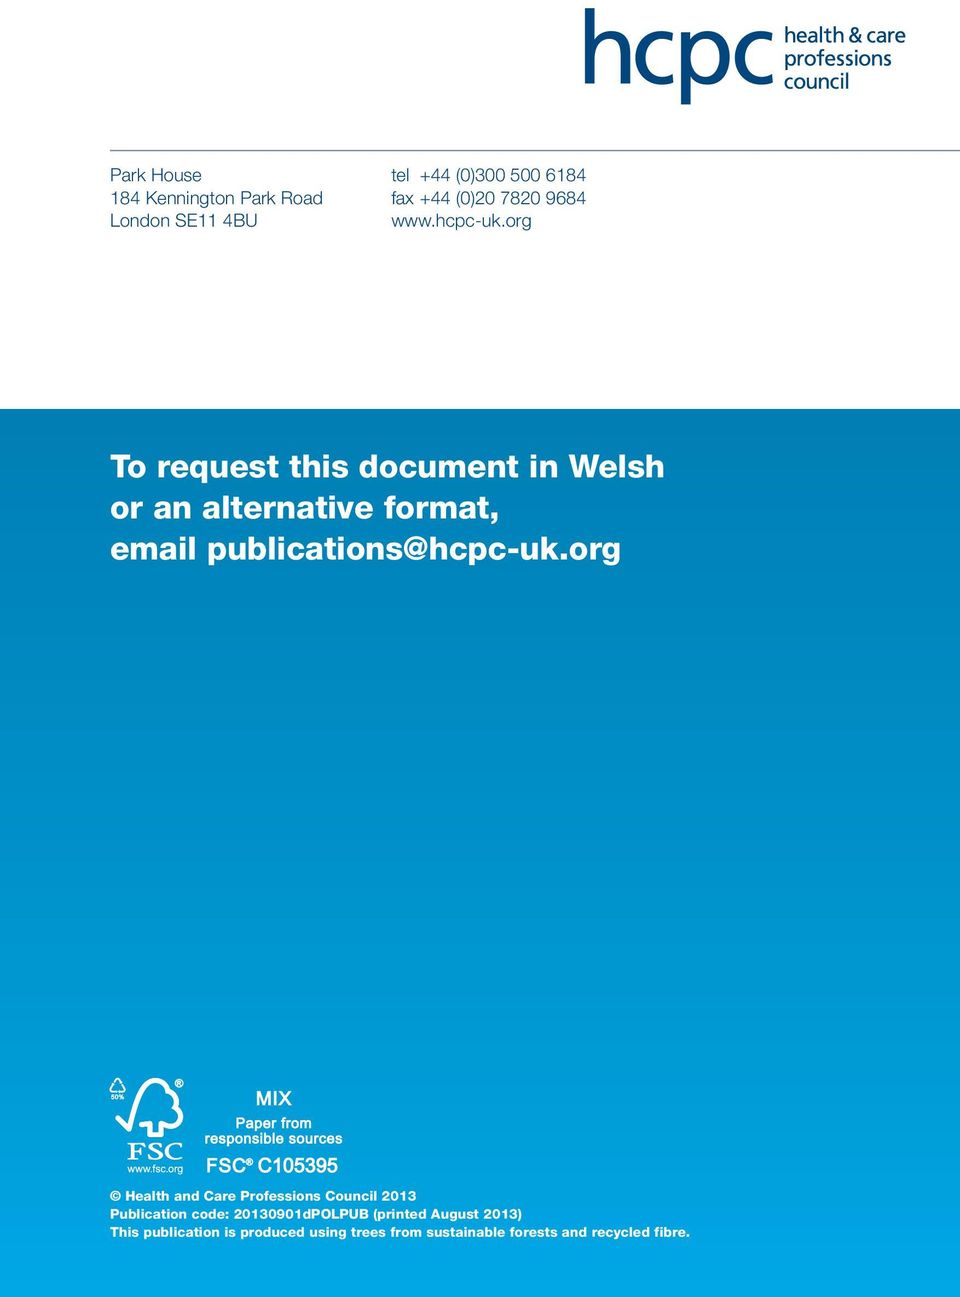 org To request this document in Welsh or an alternative format, email publications@hcpc-uk.